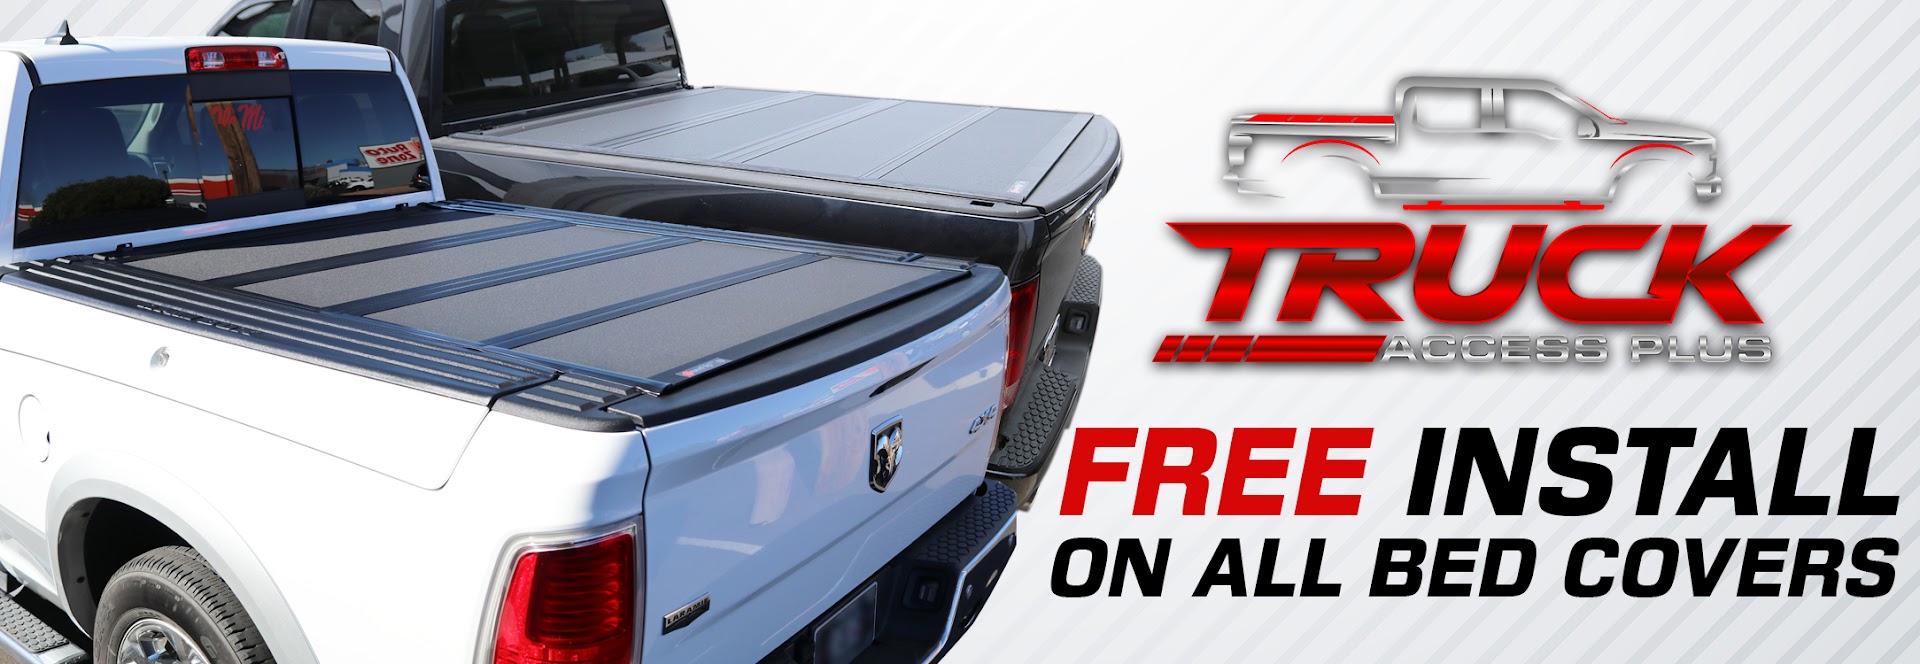 truck bed covers free install tonneau cover in phoenix az